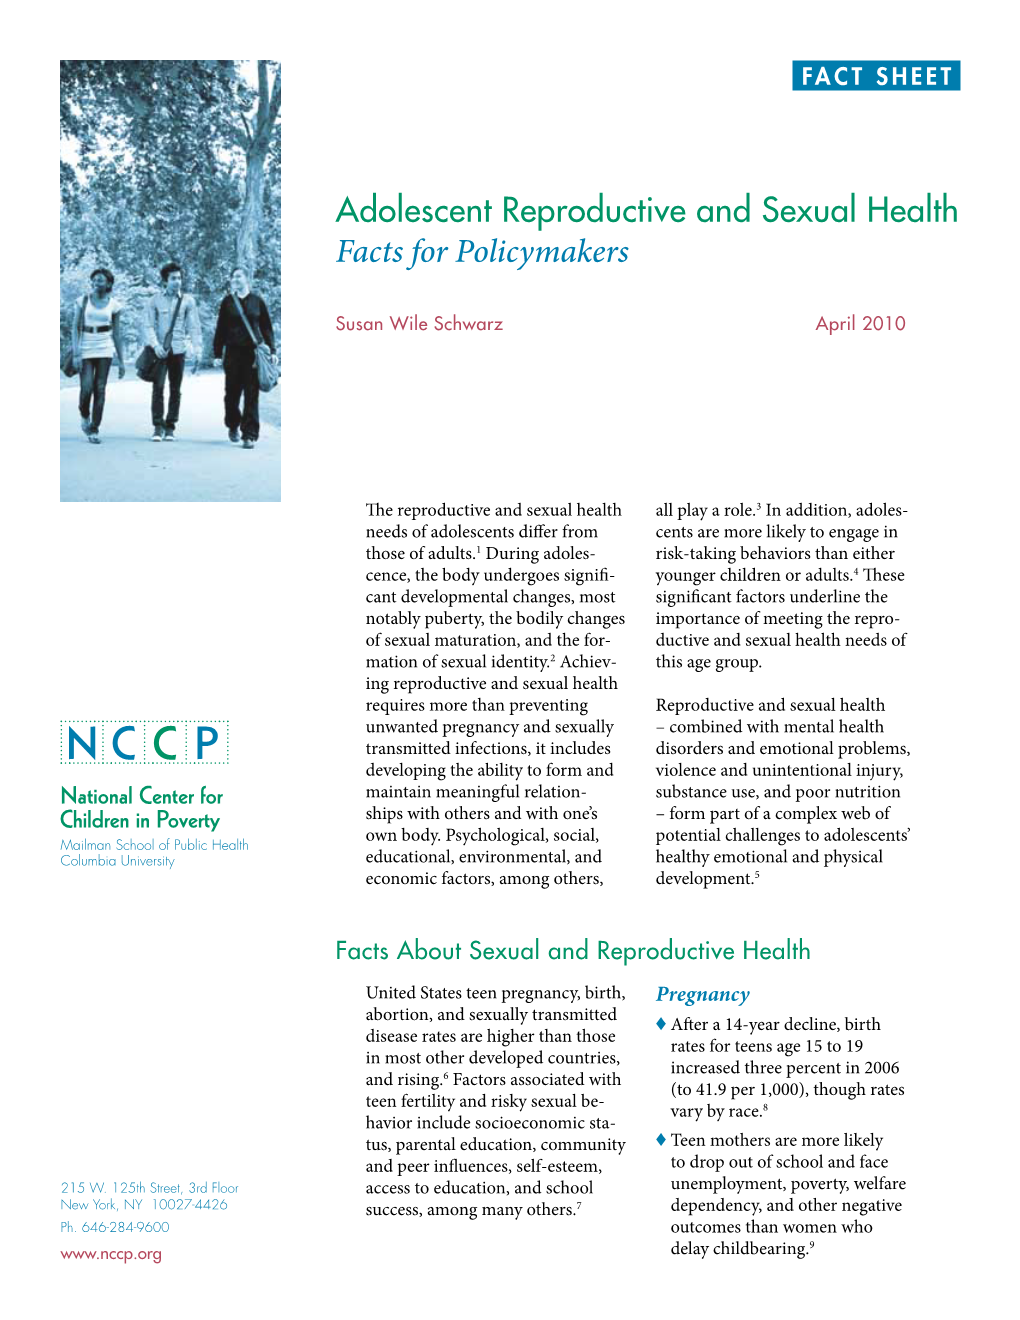 Adolescent Reproductive and Sexual Health Facts for Policymakers